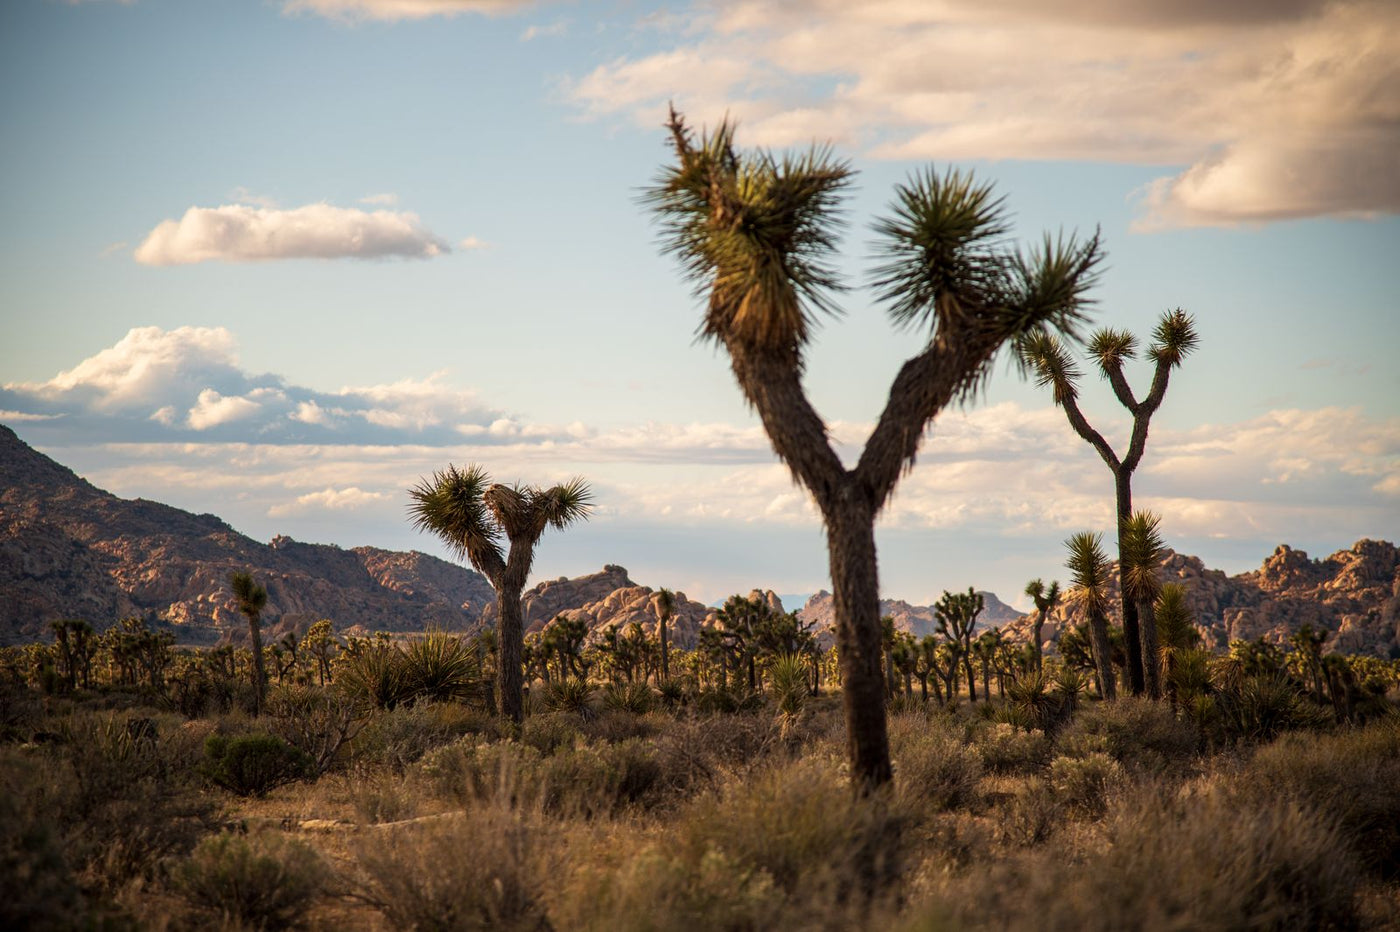 Joshua trees surrounded by rock formations under a blue sky filled with clouds inside national park